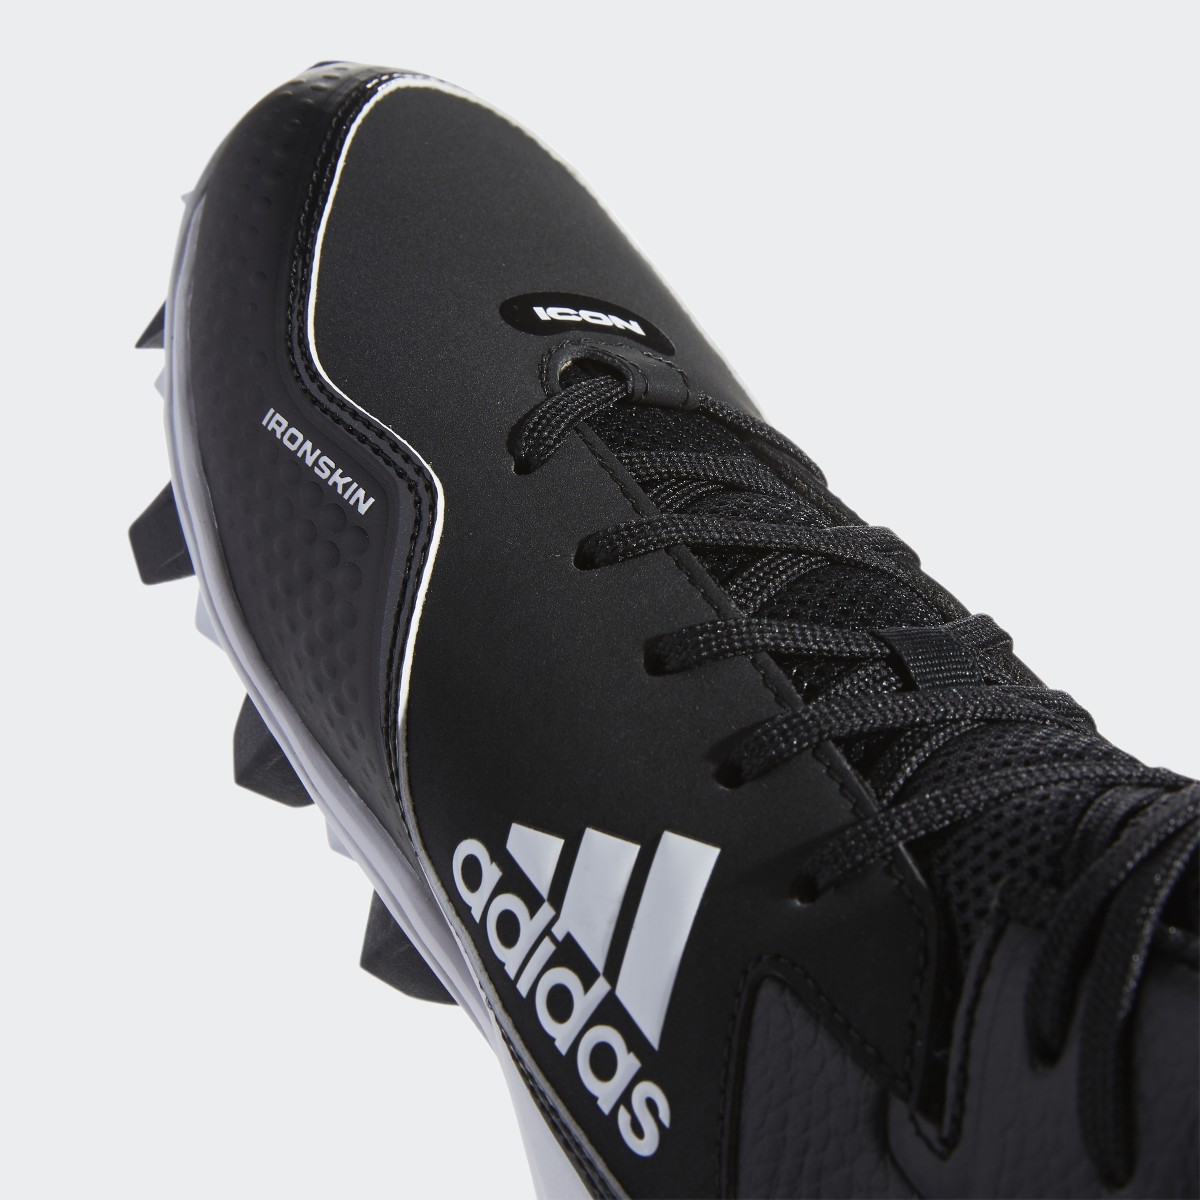 Adidas Icon 7 Mid MD Cleats. 9